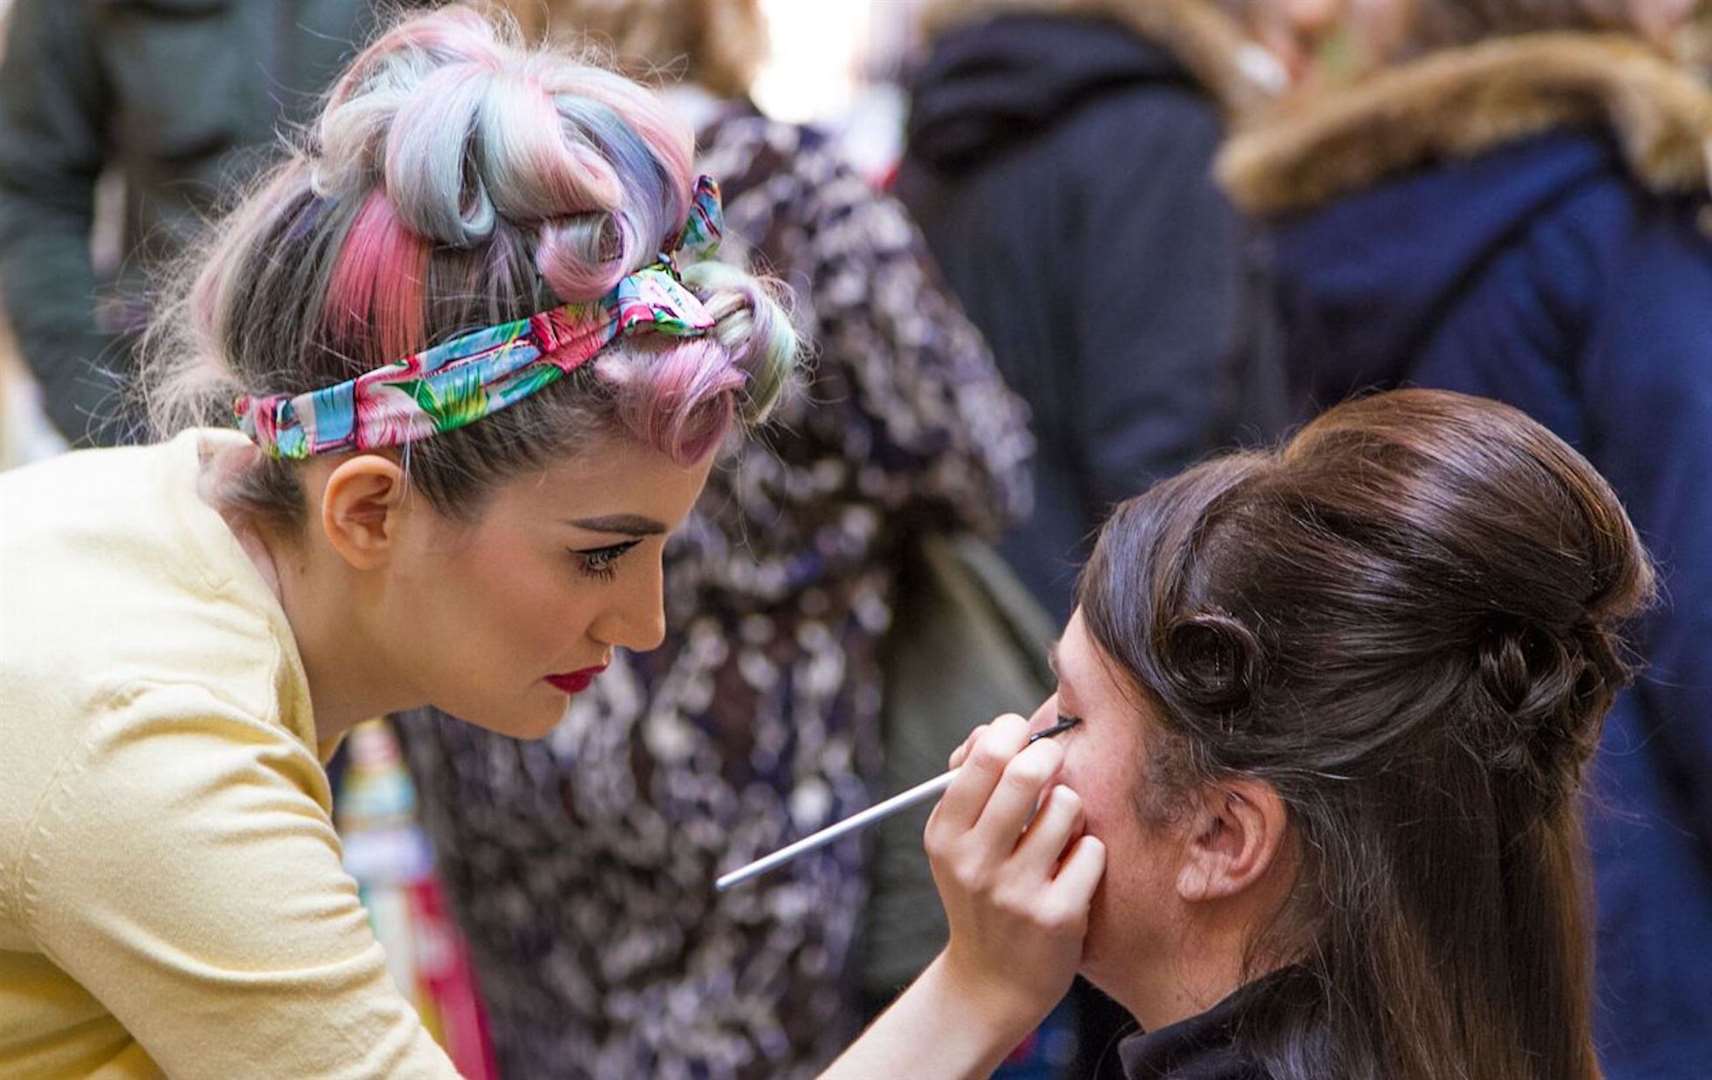 There will be vintage-inspired makeovers on offer at Lou Lou's Vintage Fair